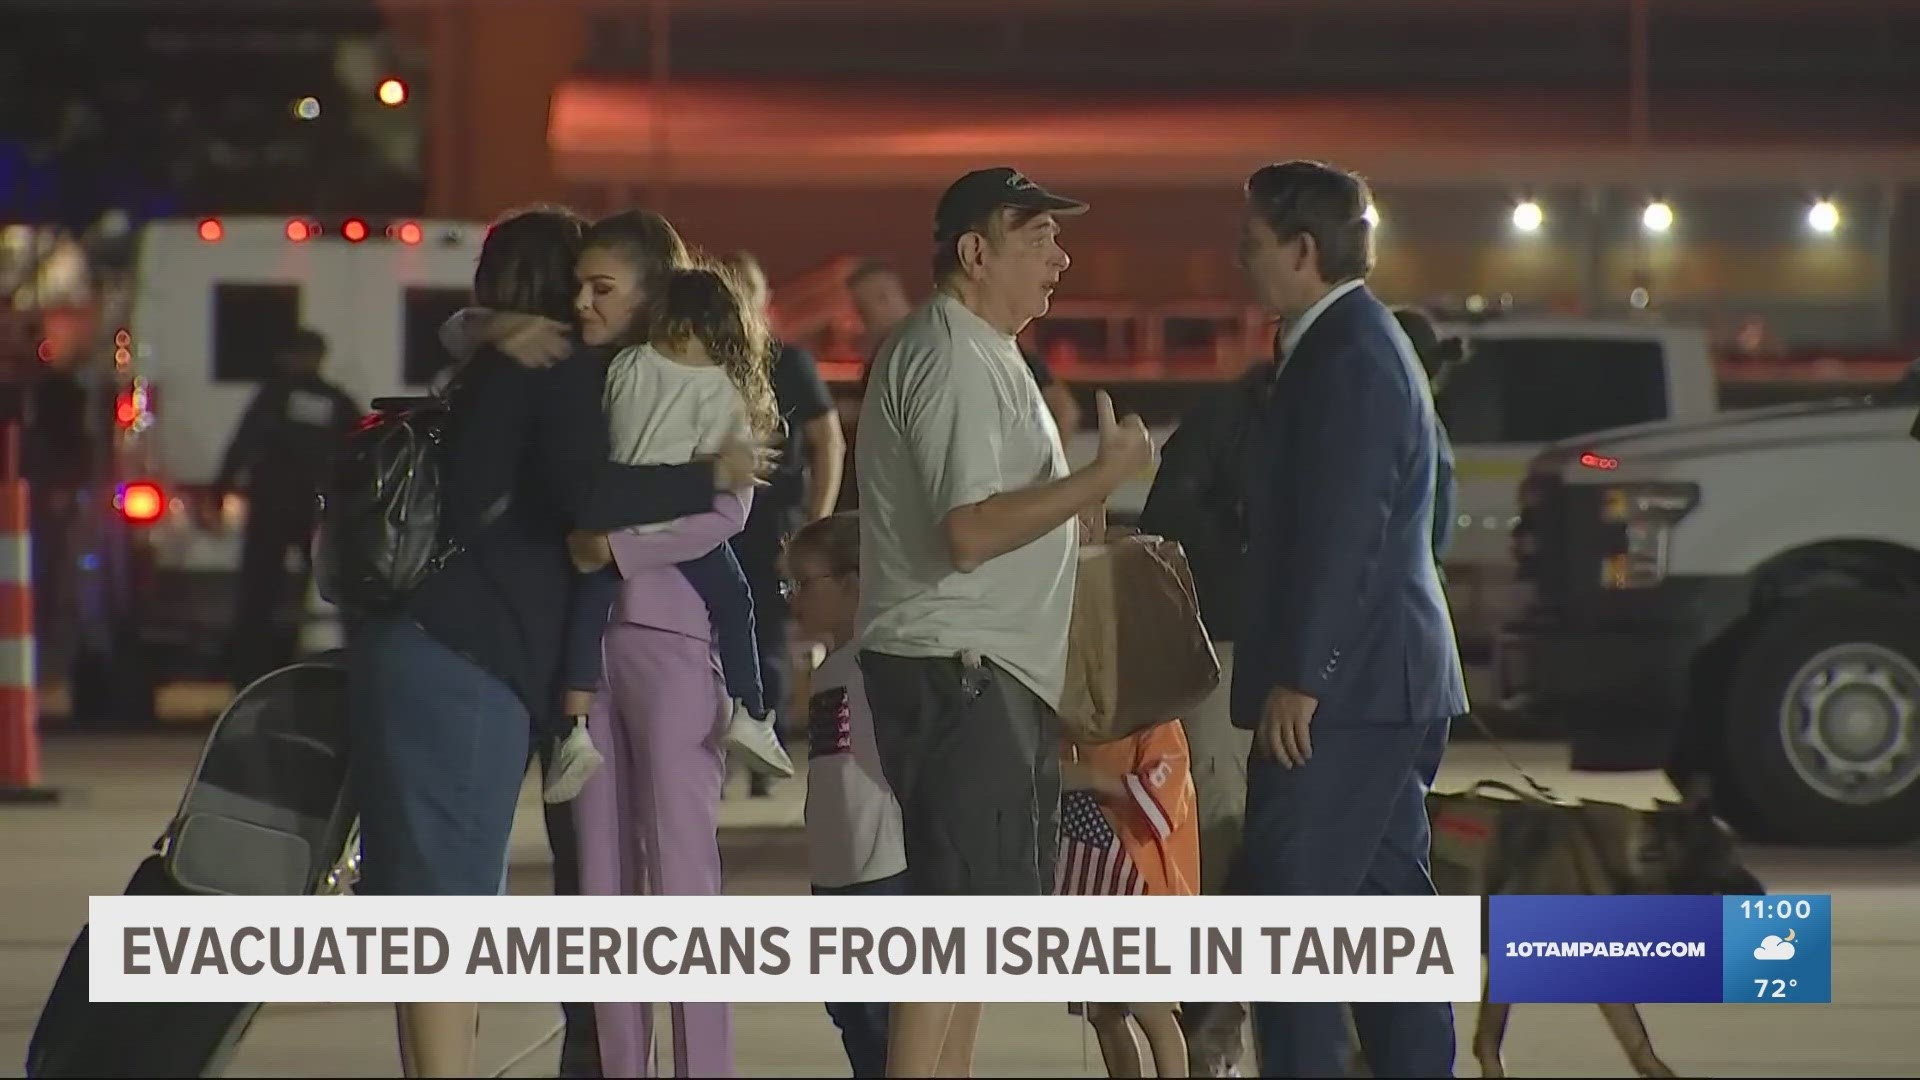 Gov. Ron DeSantis and First Lady Casey DeSantis greeted the evacuees, including Floridians, as they stepped out of the plane.